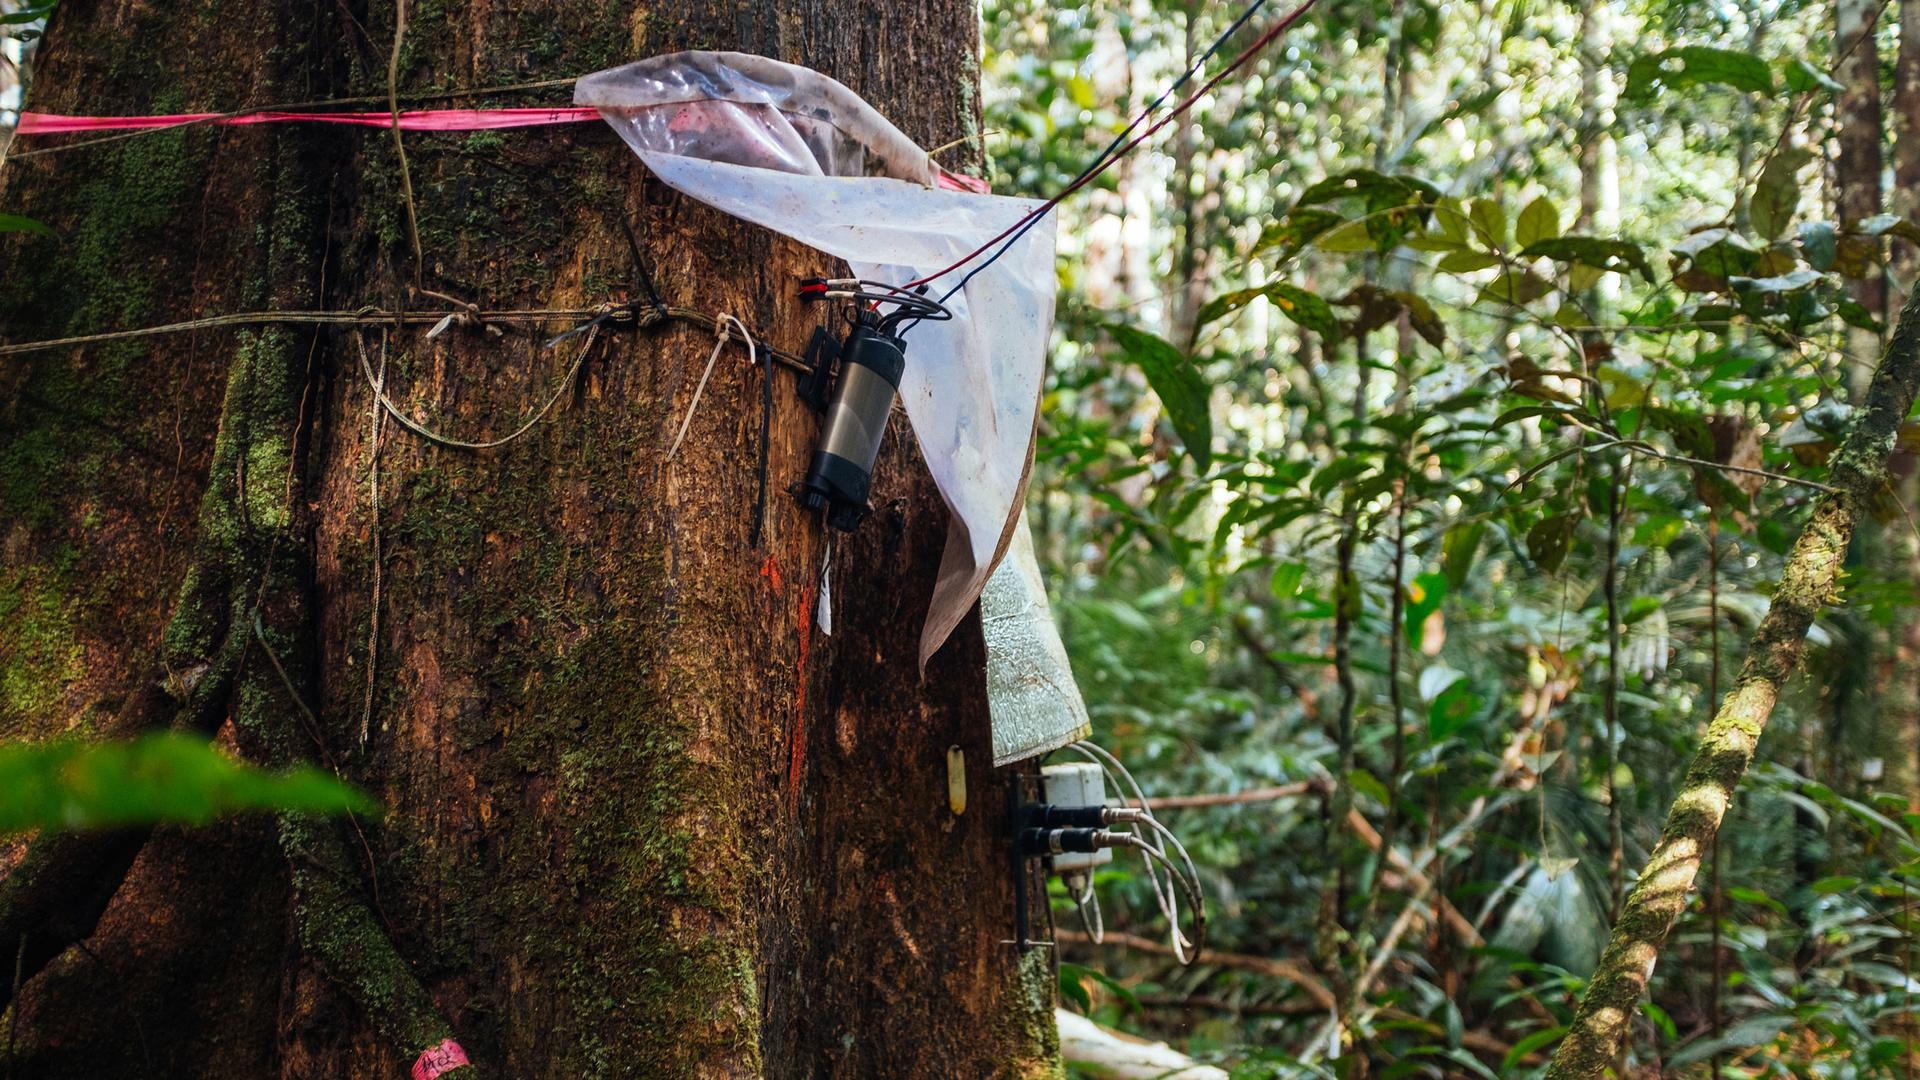 Instruments and wires are strapped to the base of a tree in the jungle.